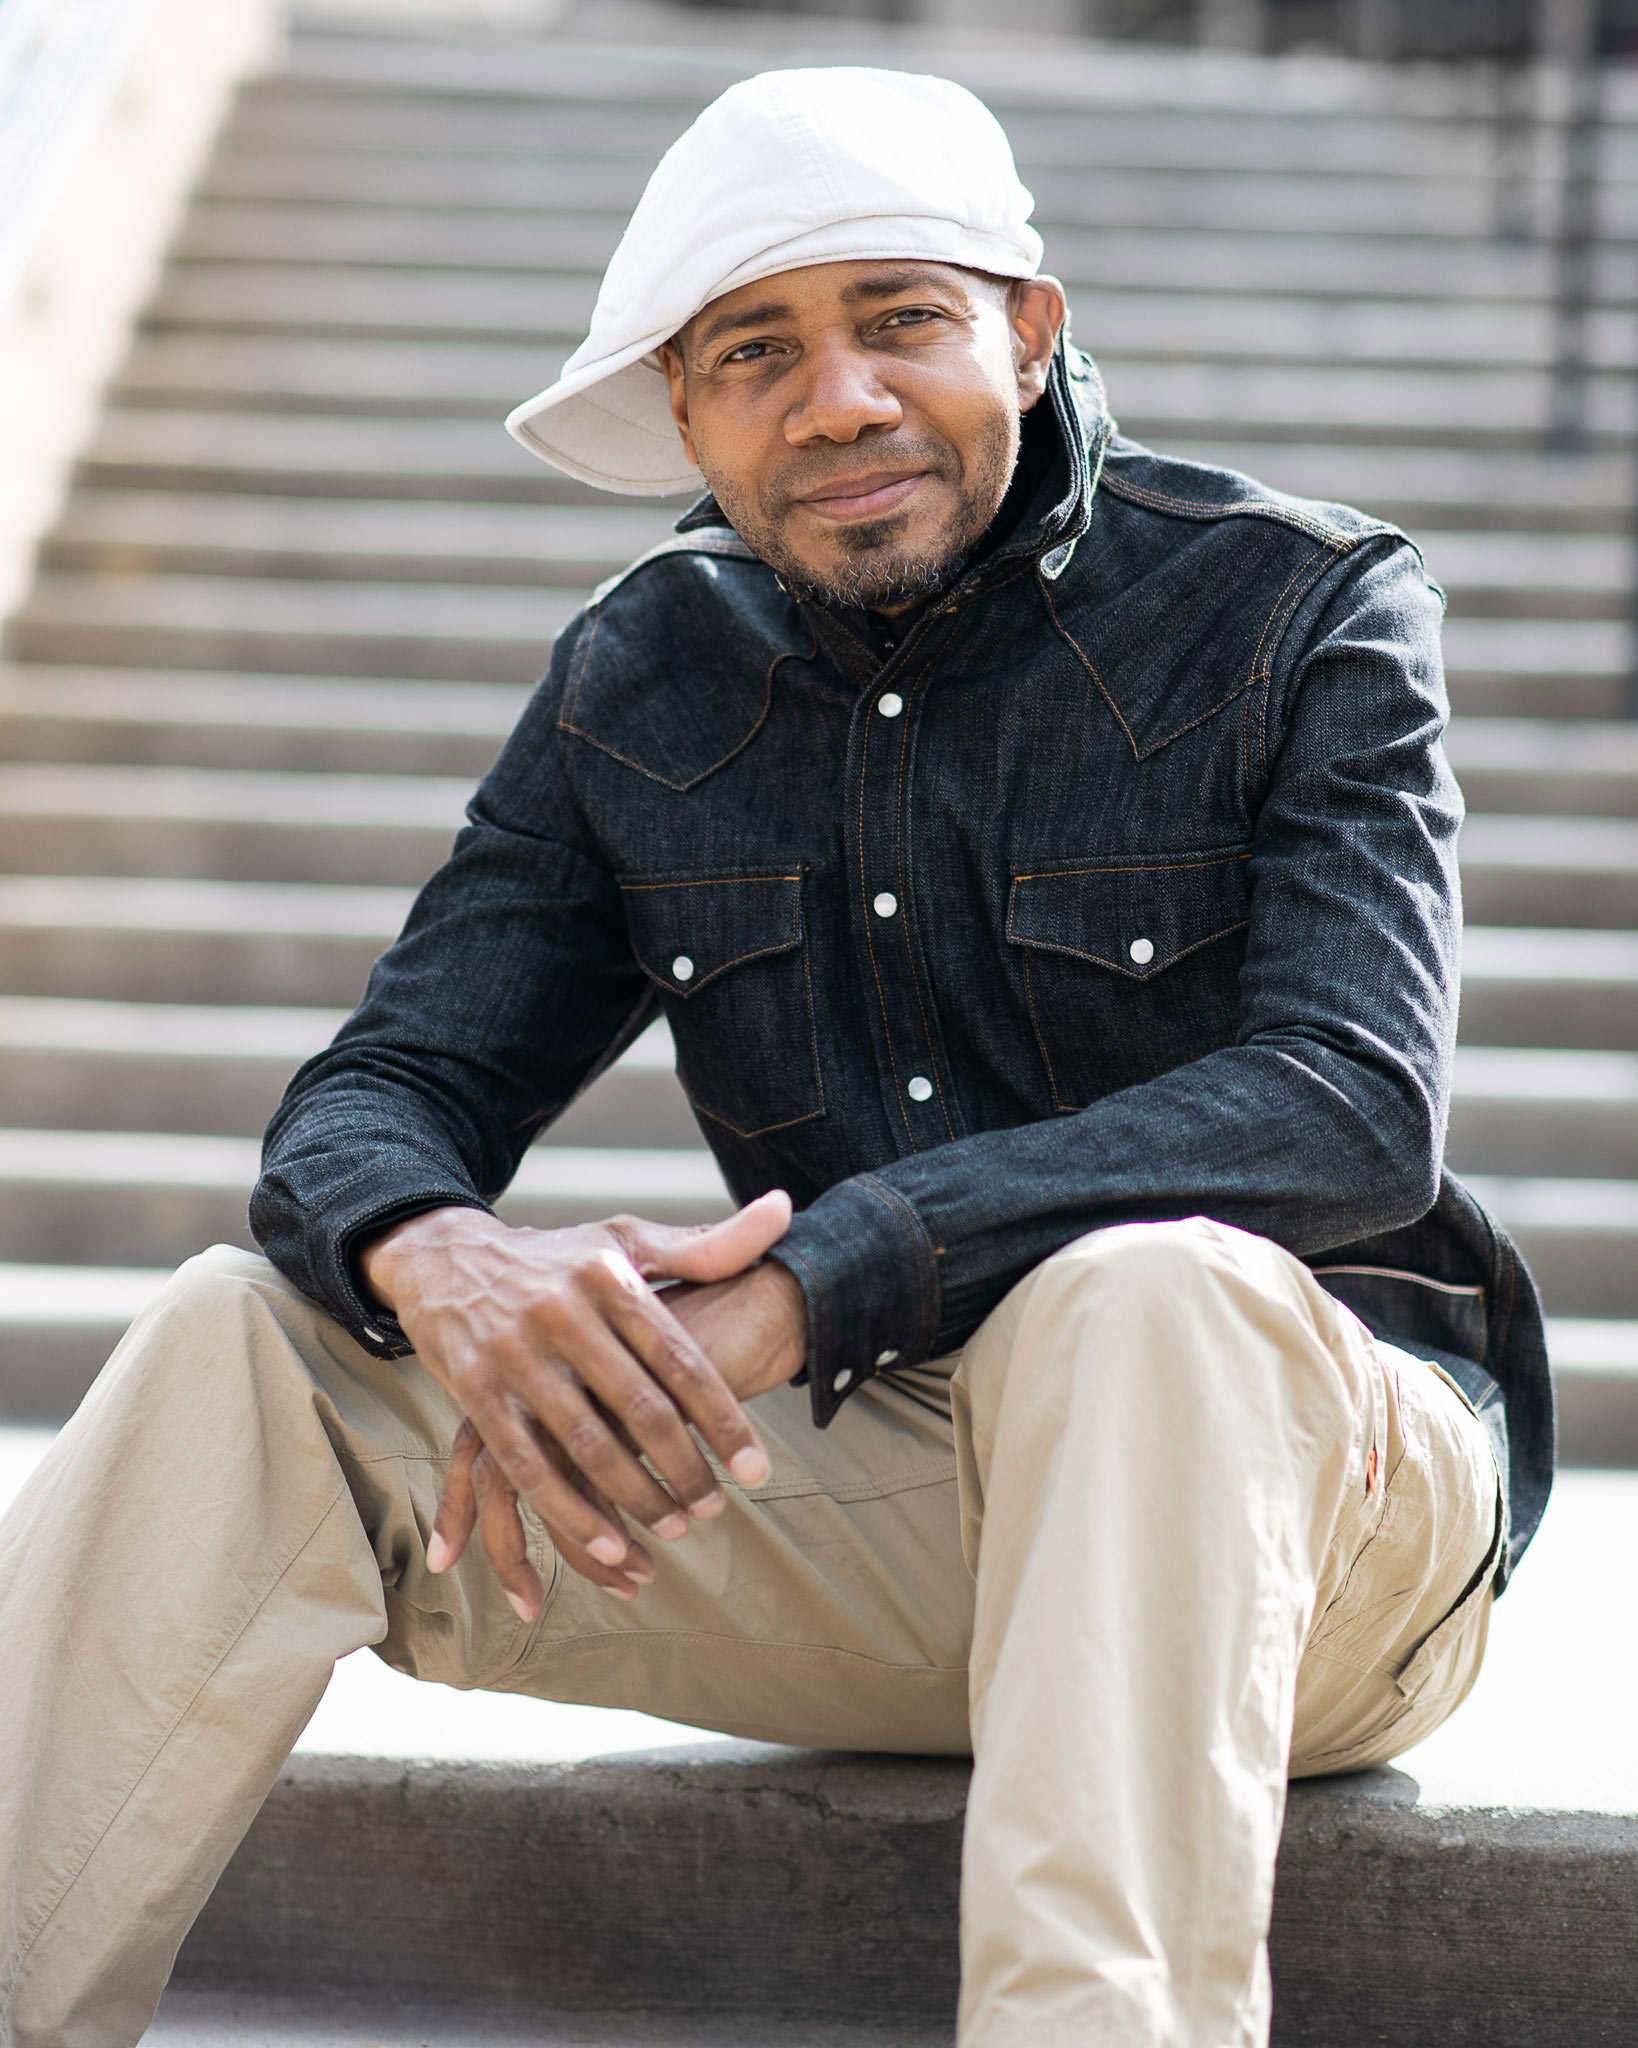 DJ Spooky Returns To NYU Abu Dhabi For An Evening Of Vibrant New York-Based Electronic Music And Hip-Hop